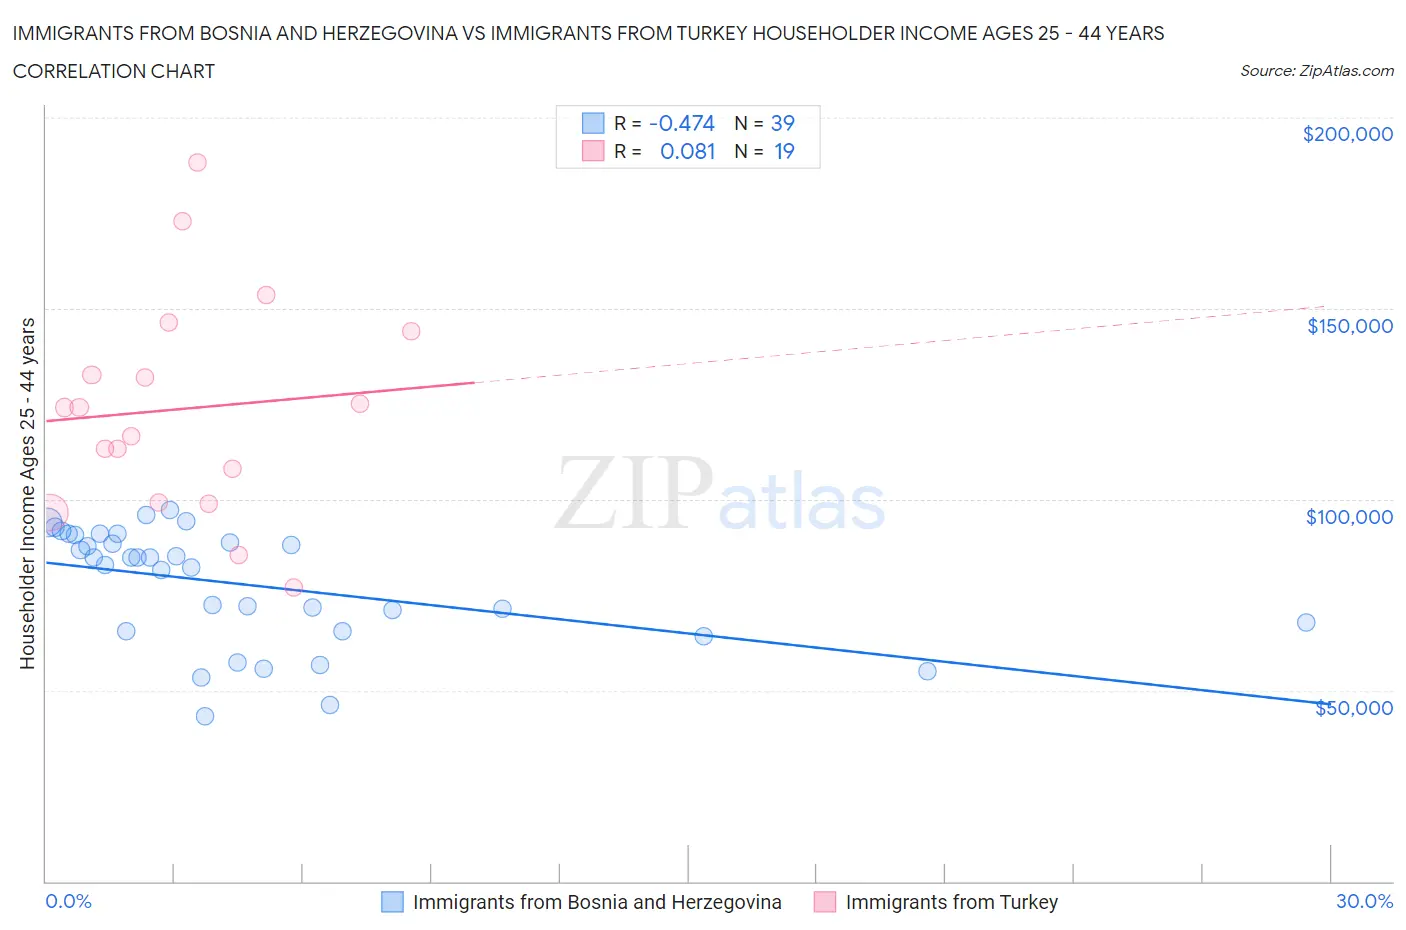 Immigrants from Bosnia and Herzegovina vs Immigrants from Turkey Householder Income Ages 25 - 44 years